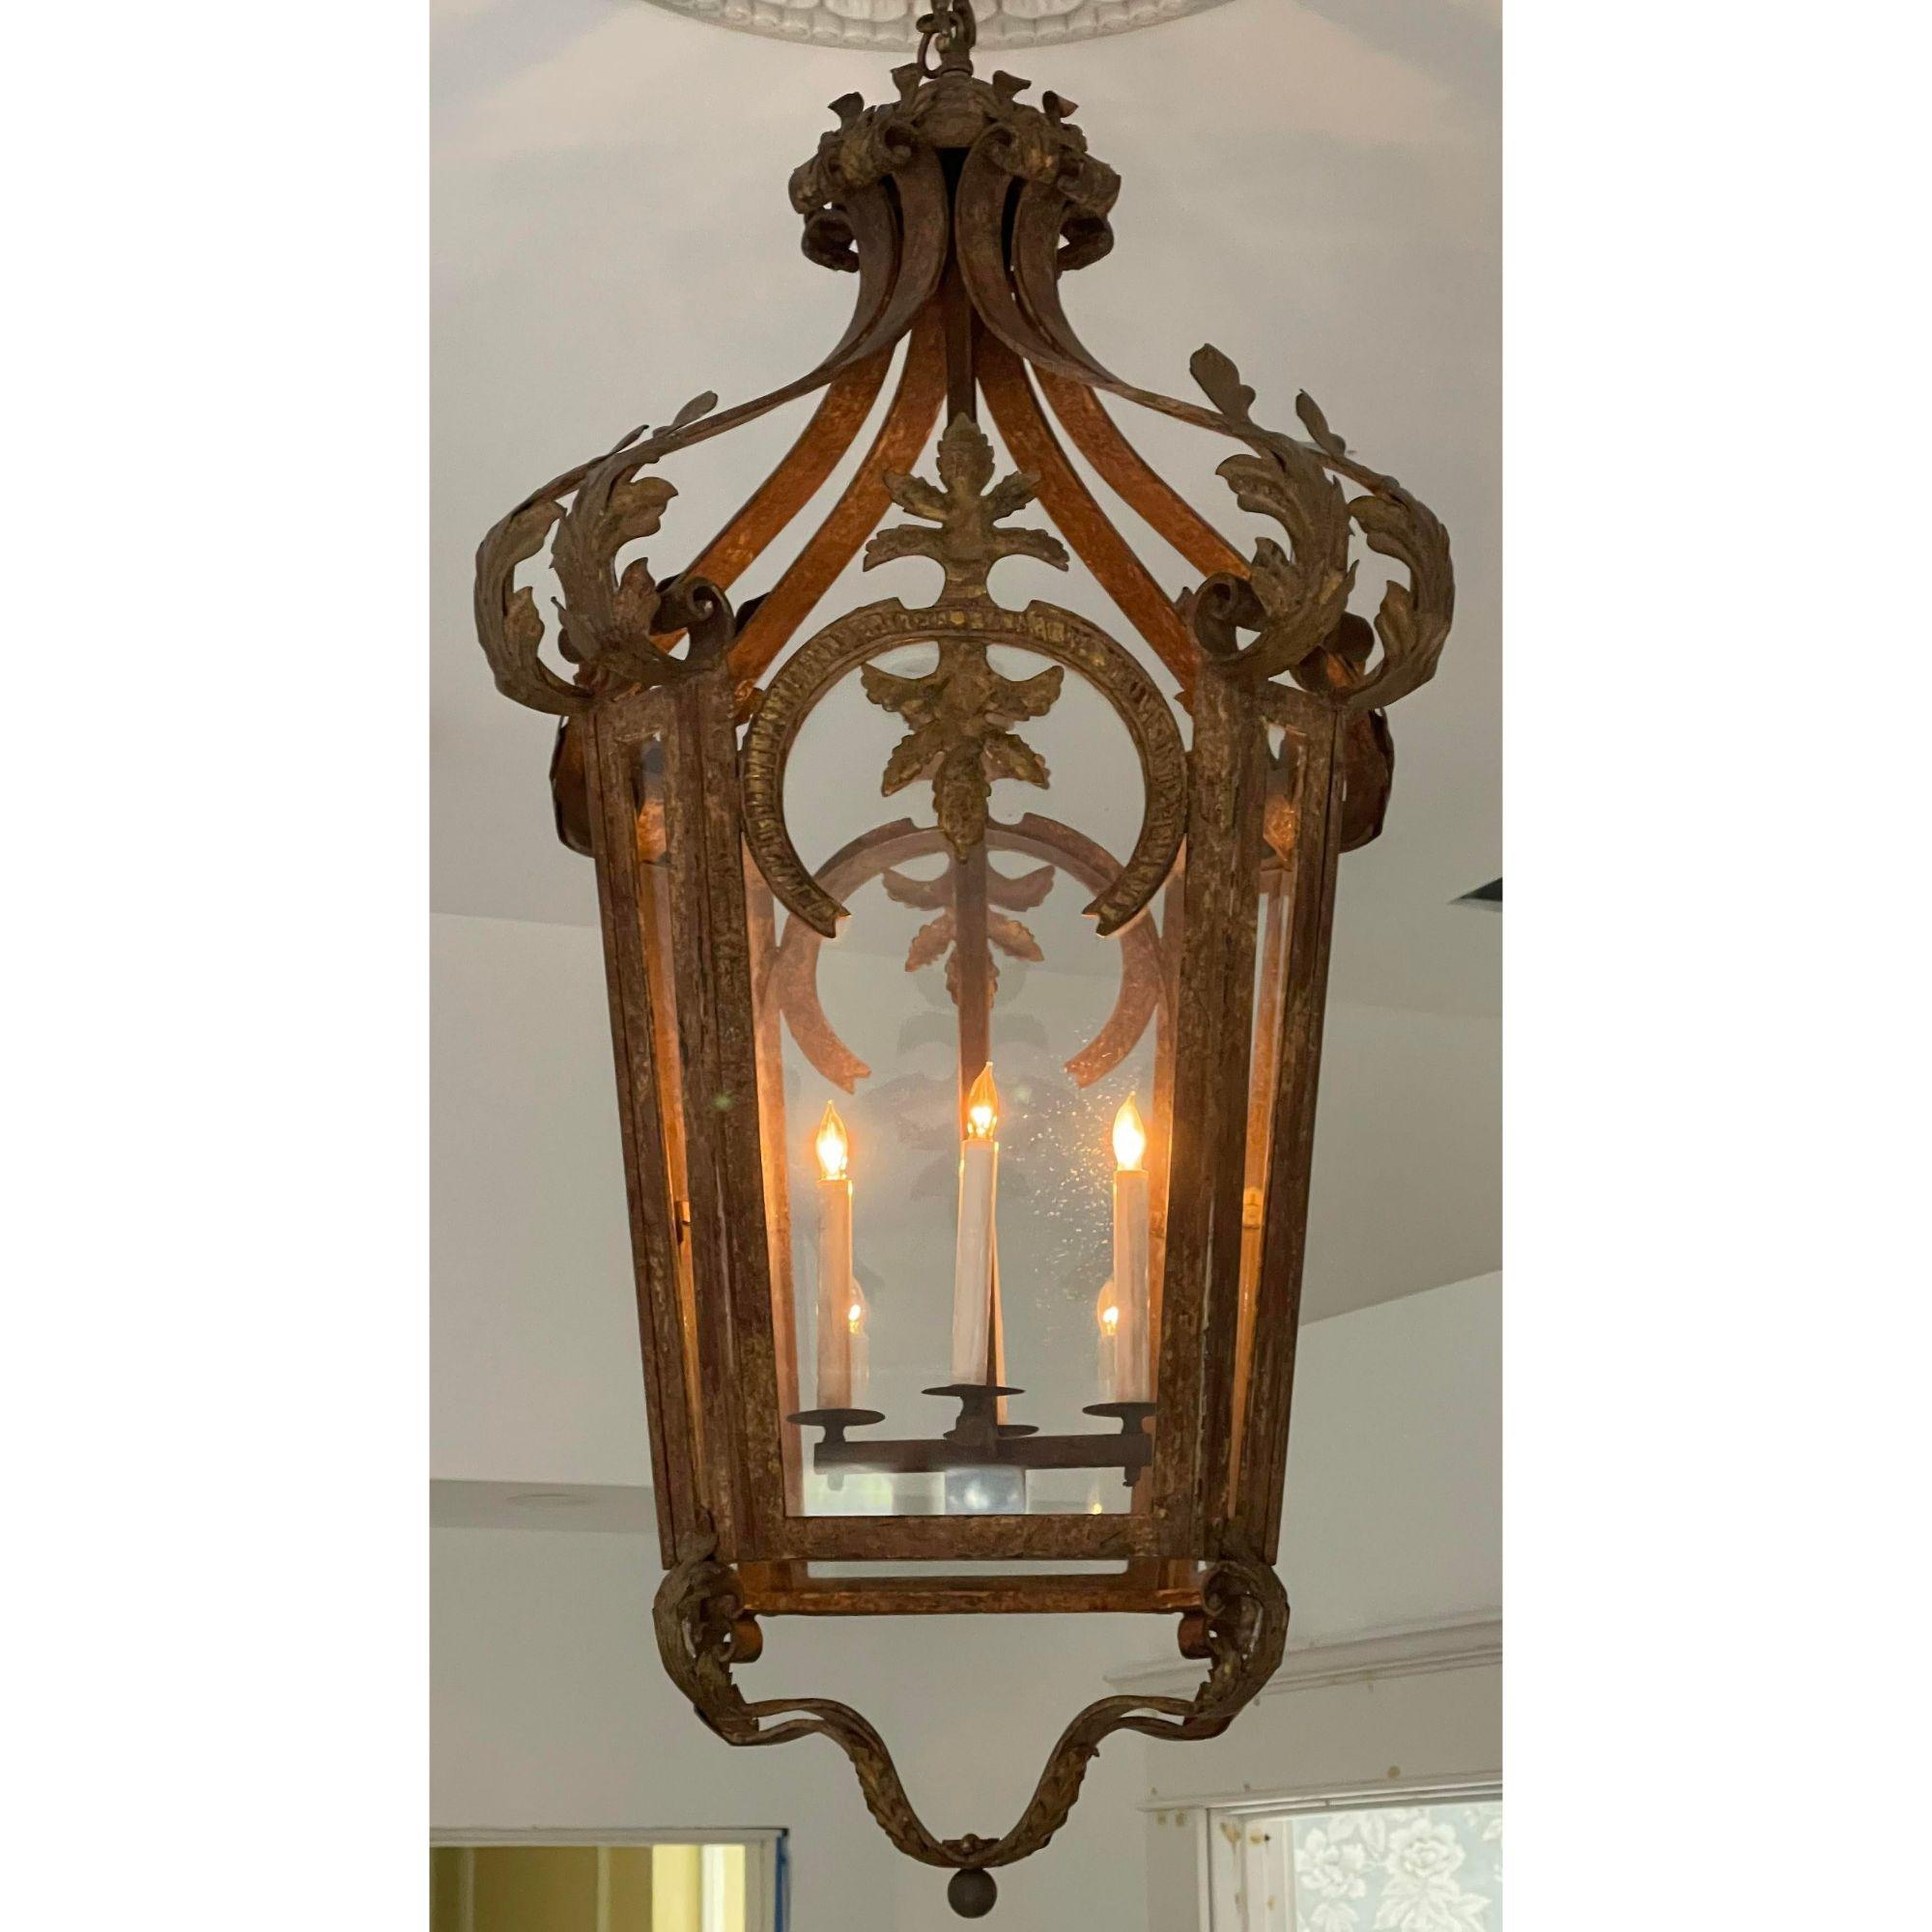 18th Century style monumental spanish colonial wrought iron lantern chandelier.

Additional information:
Materials: Iron, wrought iron.
Color: Brown.
Period: 2010s.
Styles: Spanish Colonial.
Power sources: Up to 120 V (US standard)